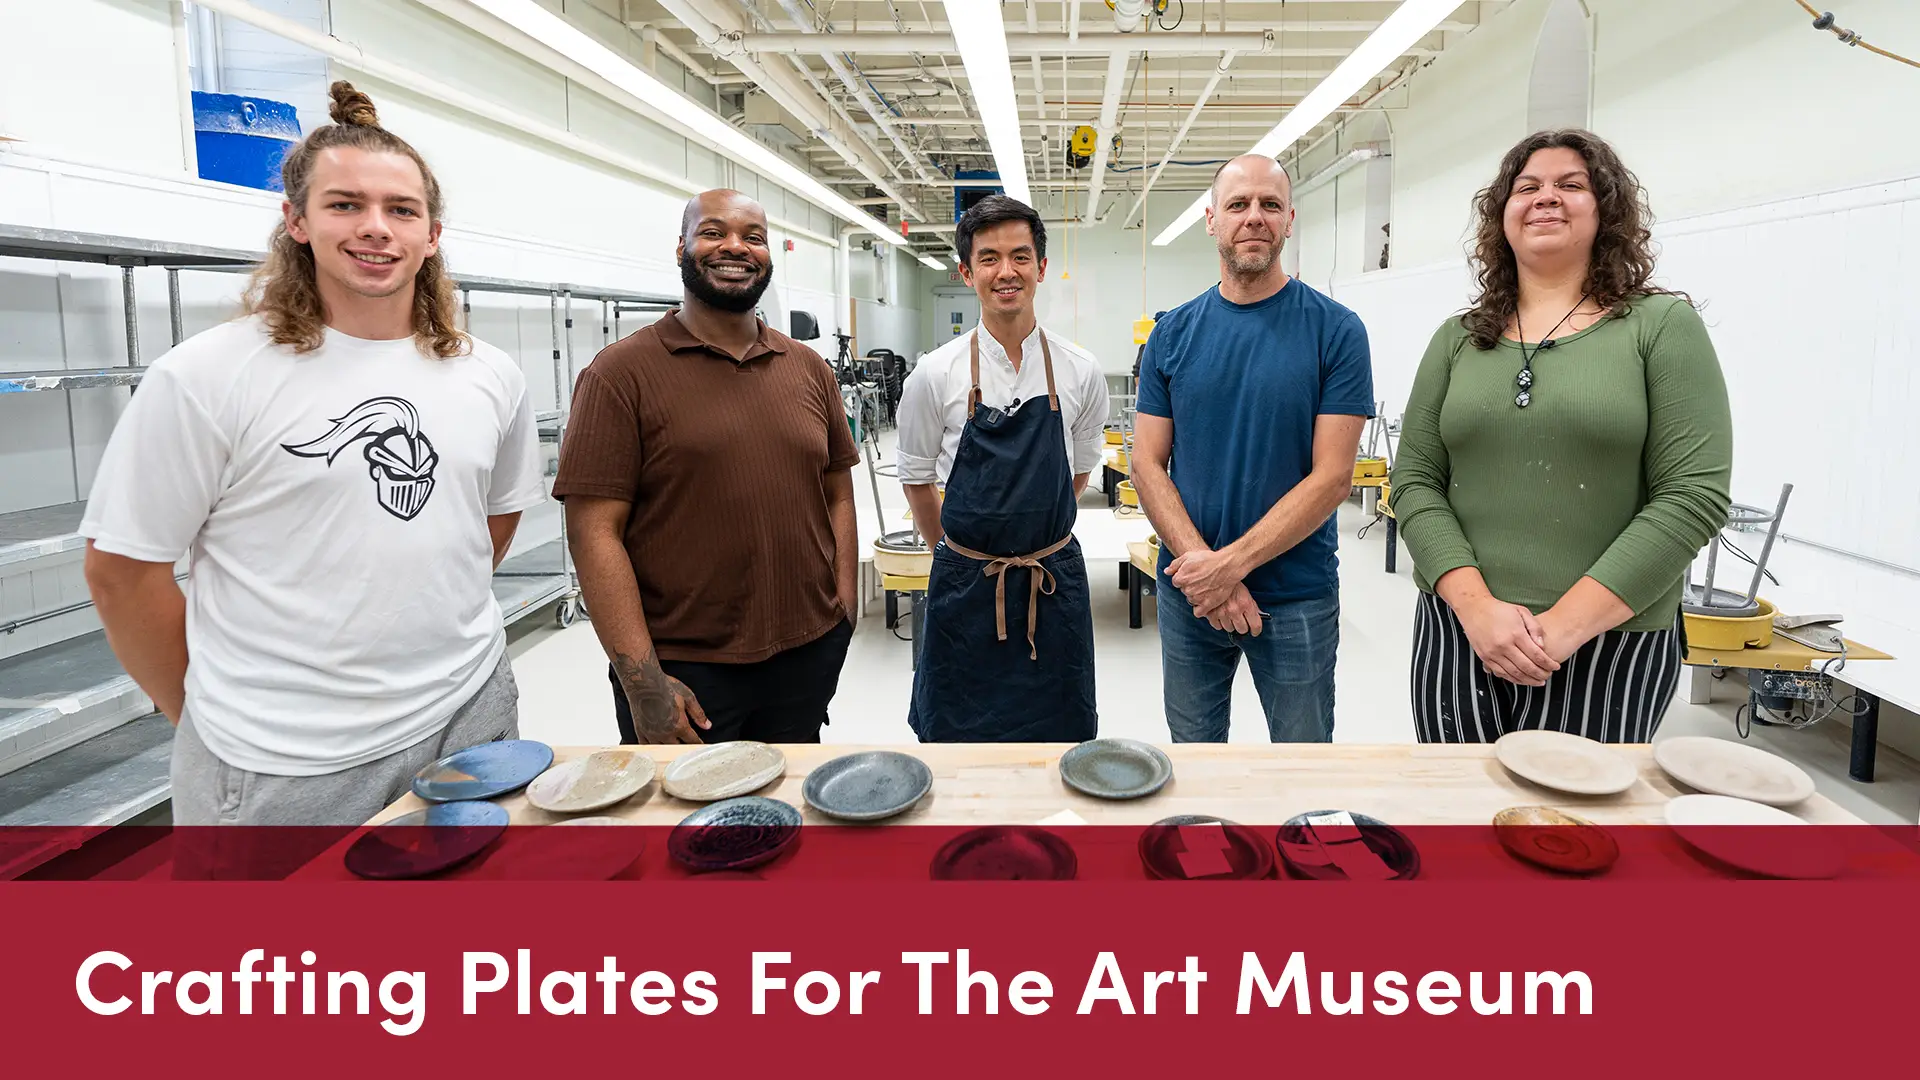 Thumbnail for YouTube video of students and faculty around a table with ceramic plates